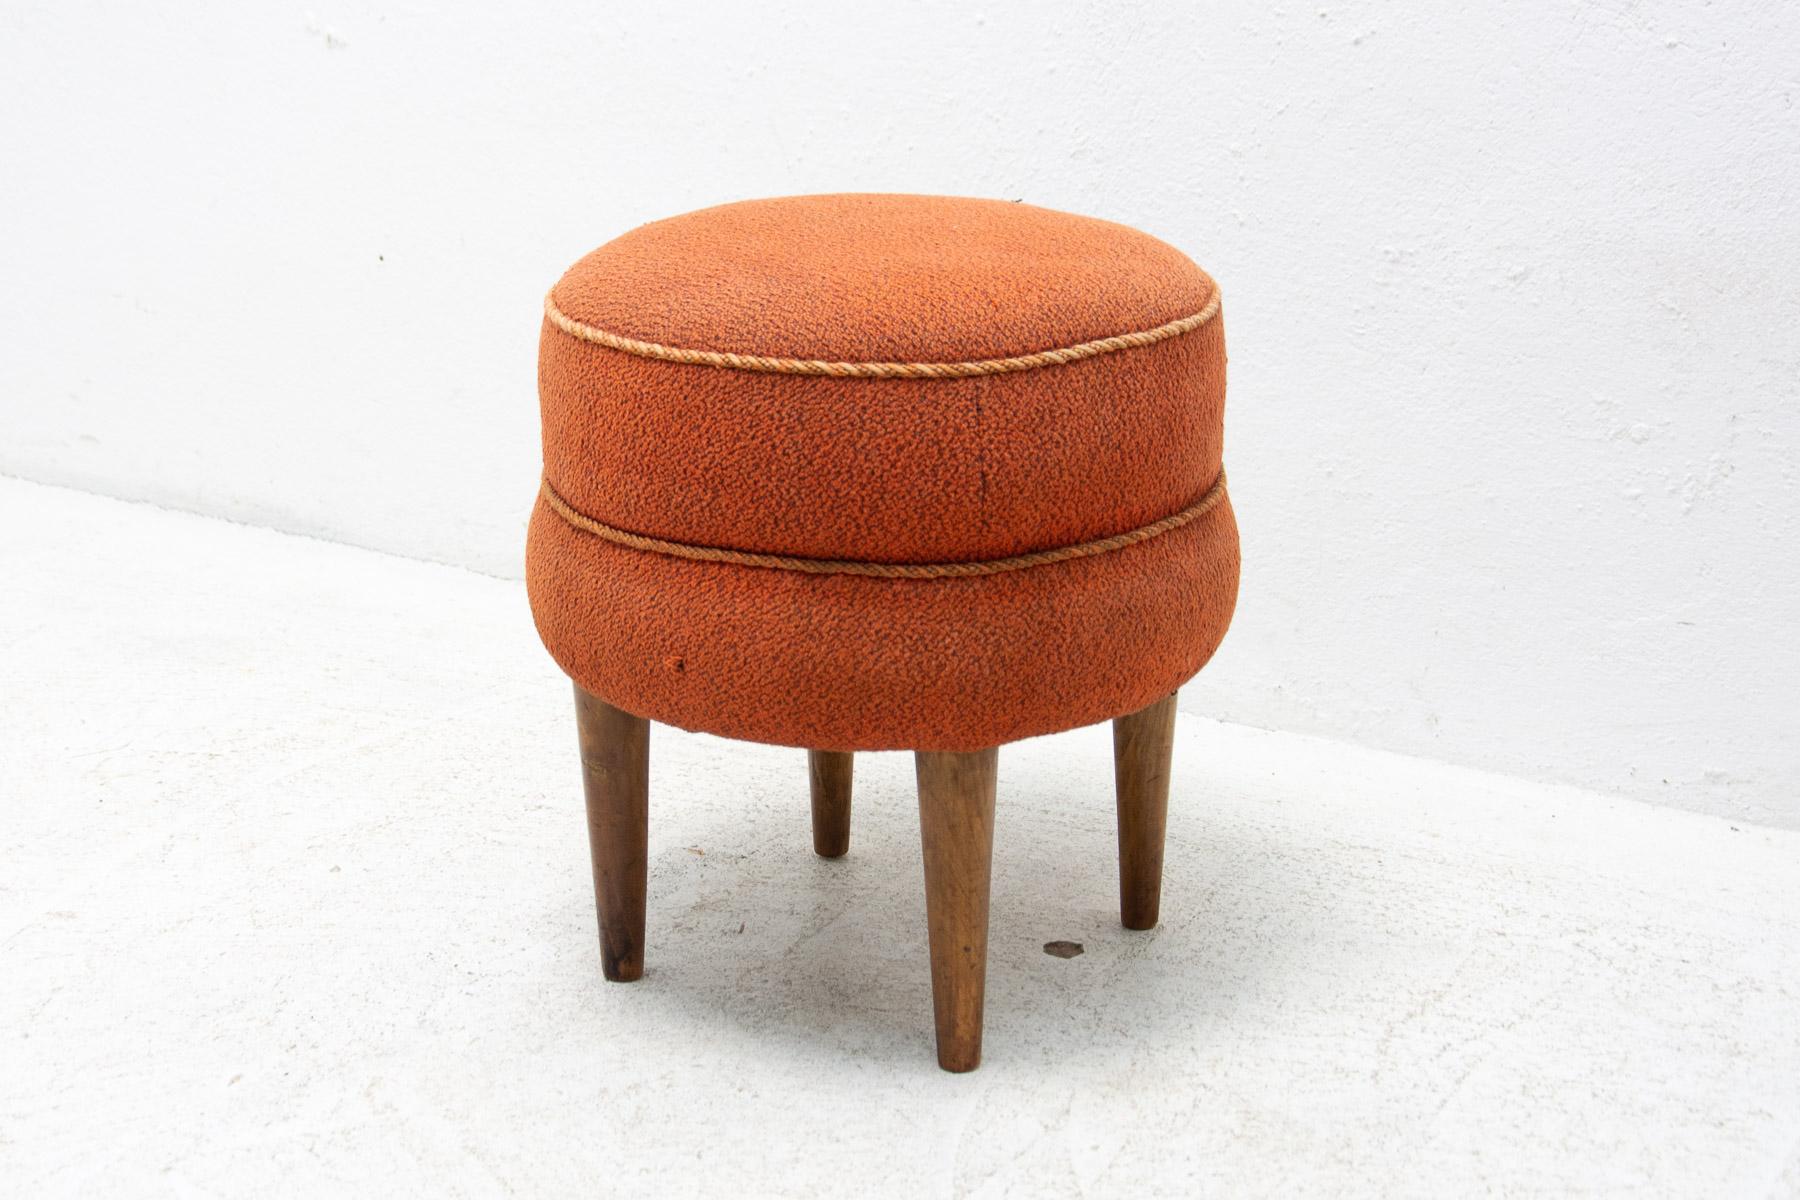 This pouffe- footstool was designed by Jindrich Halabala and made in UP Závody company in the 1930´s.

A very comfortable retro chic. In good Vintage condition, showing signs of age and using.

Dimensions: 37 x 42 x 37 cm (Width x Height x